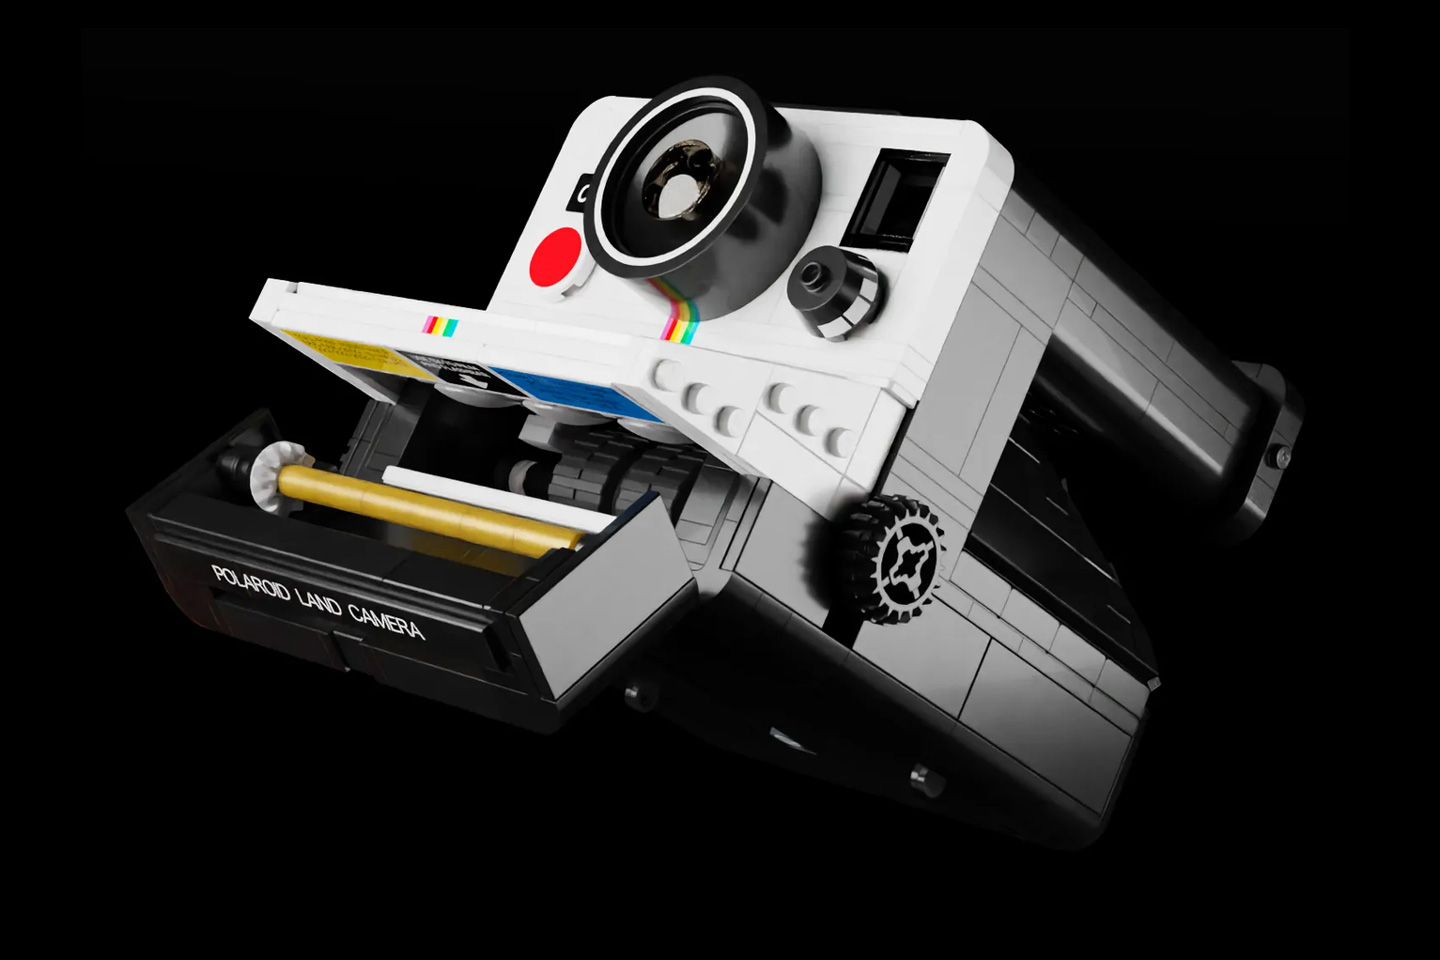 #LEGO version of Polaroid’s iconic OneStep Camera is built to stunning detail with a functioning film tray